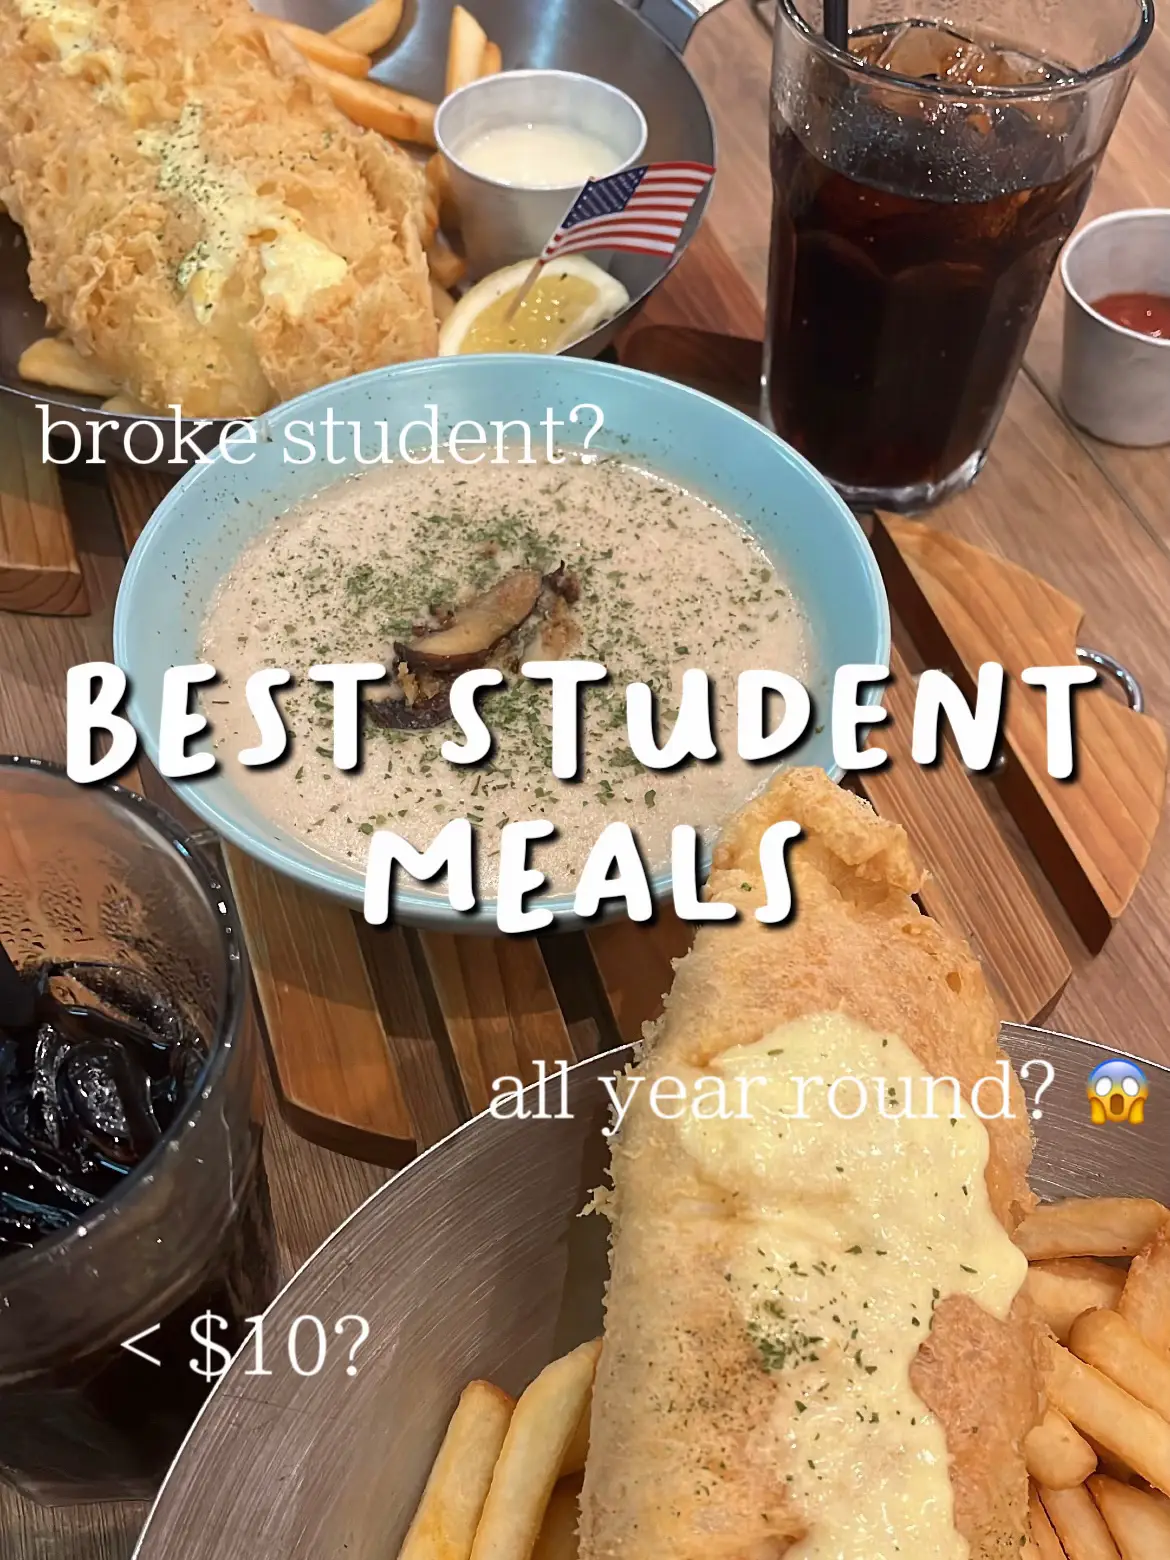 broke student? here are the best student meals! 💸's images(0)